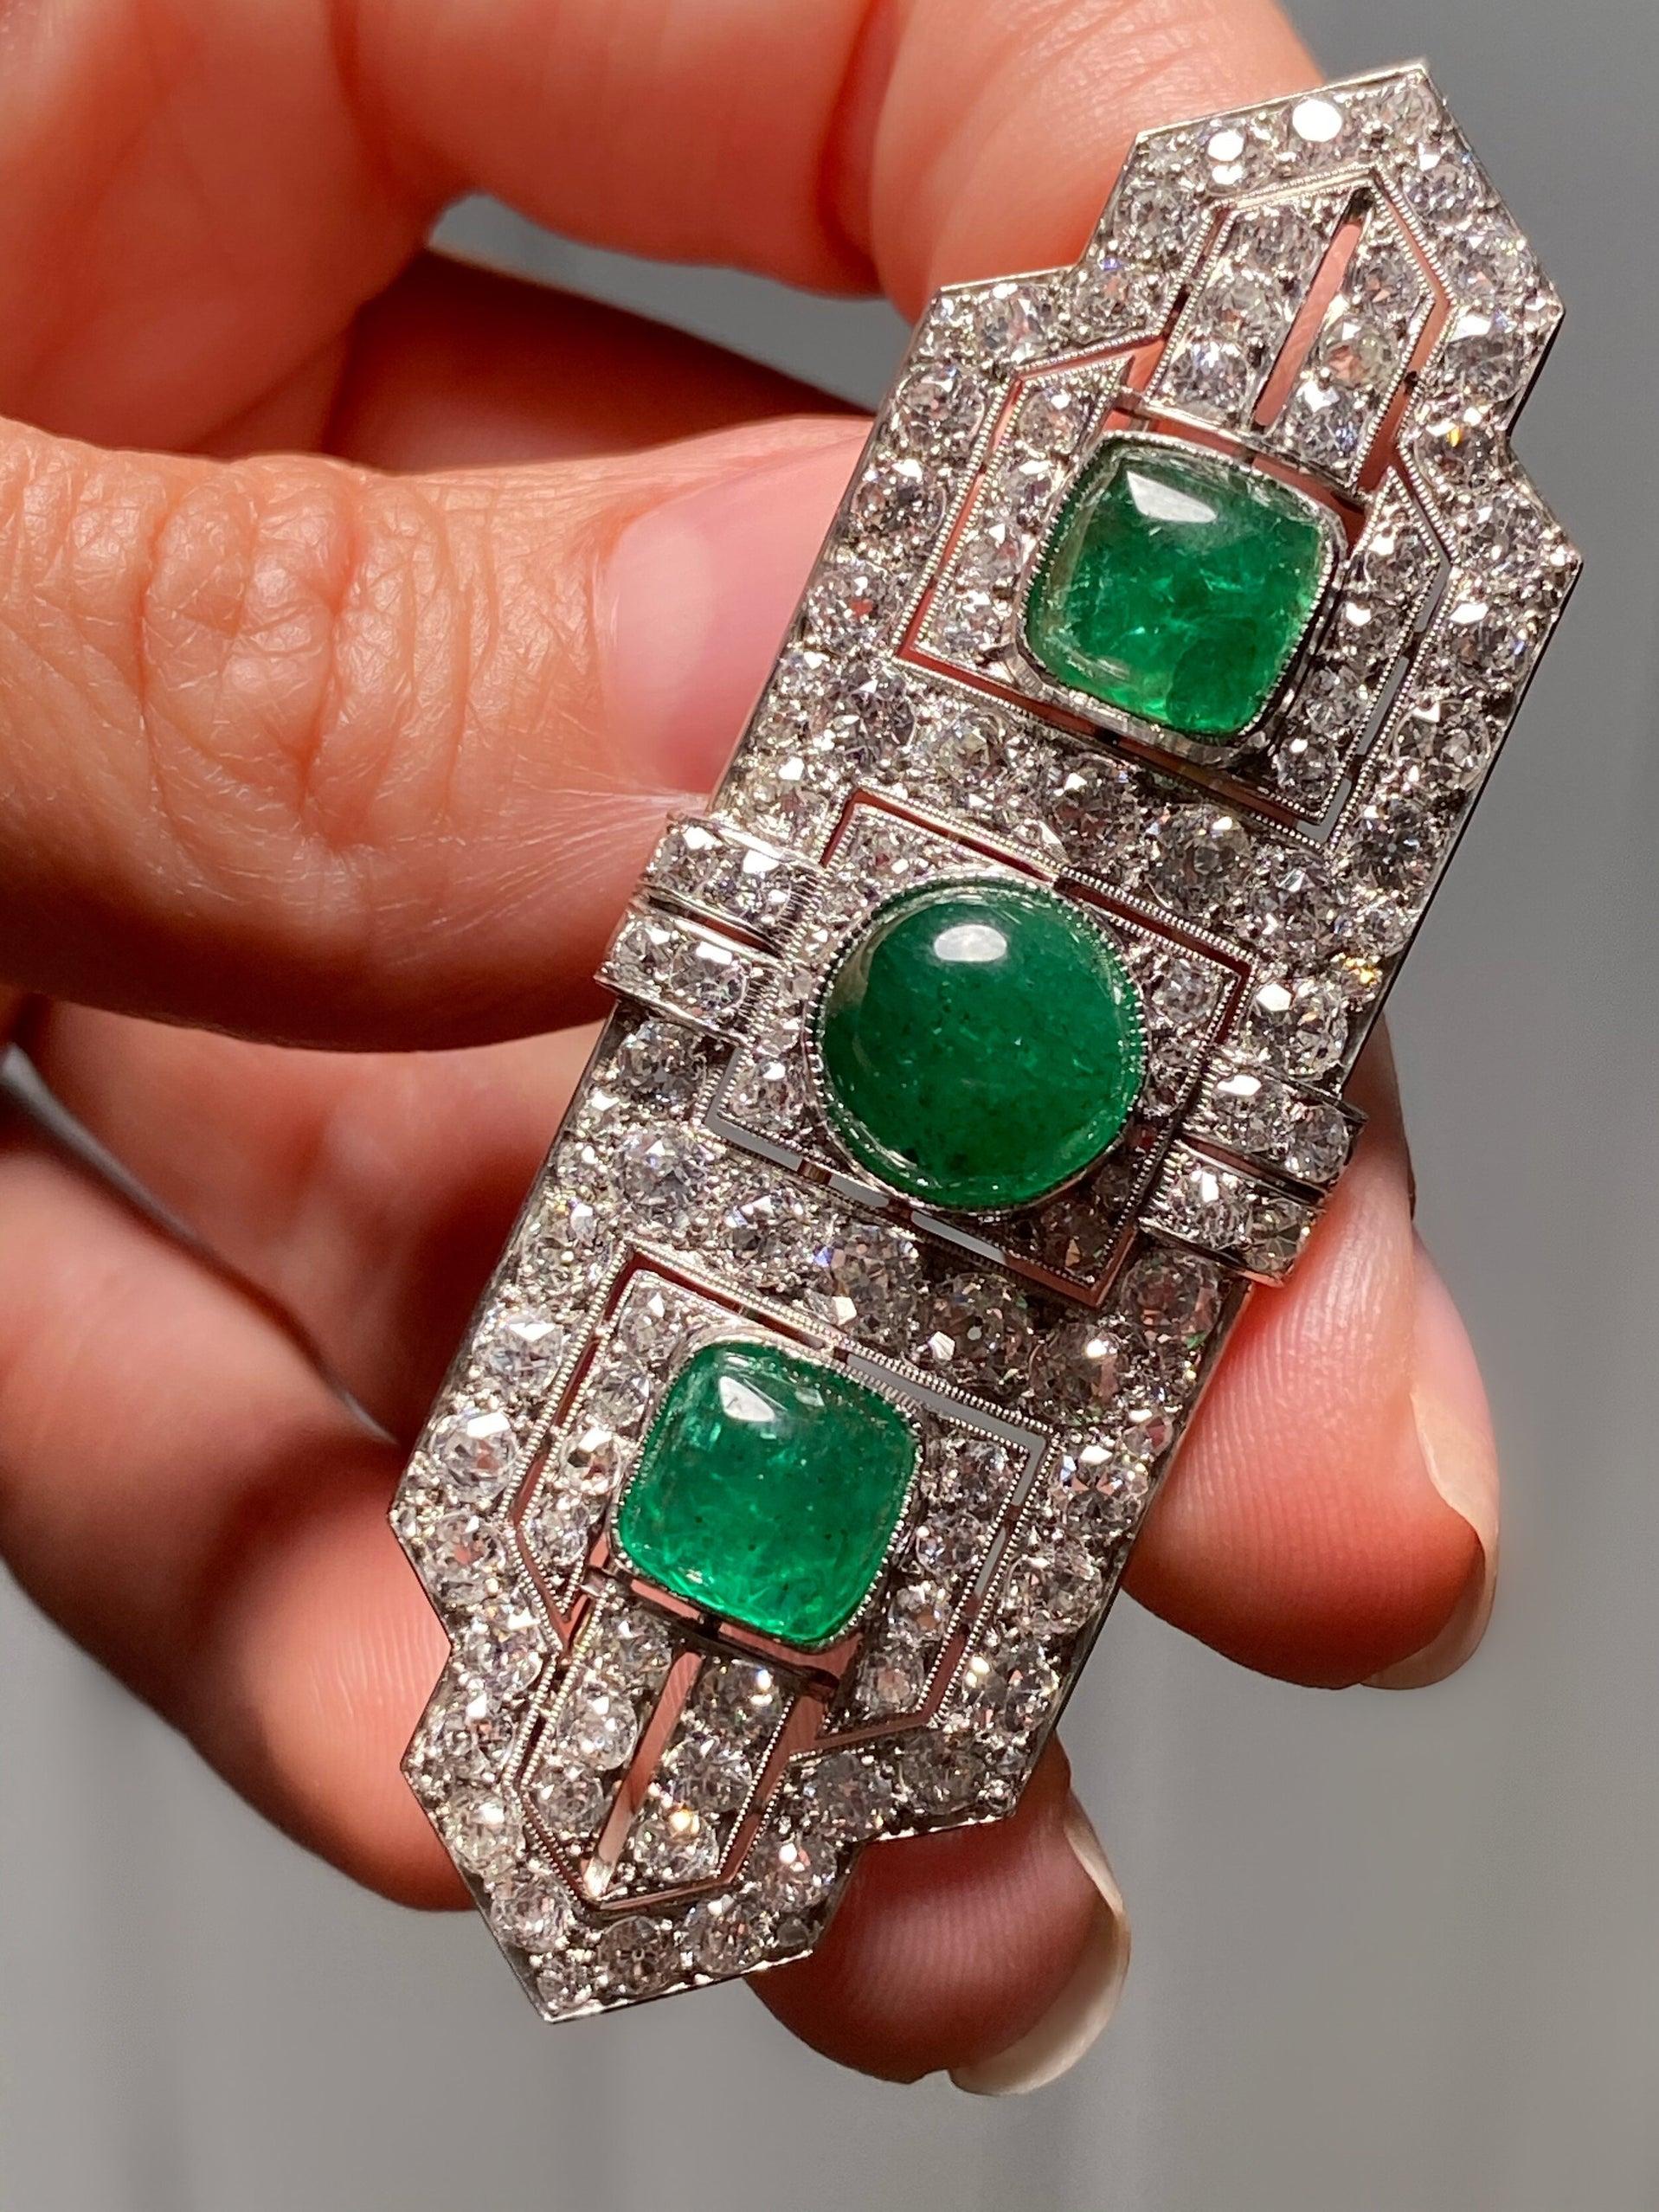 This sleek and sophisticated brooch was artfully designed and meticulously handcrafted by the esteemed French jeweler, Boucheron. Exquisite in every way, this linear brooch centers on a trio of richly saturated, crystalline green cabochon emeralds,